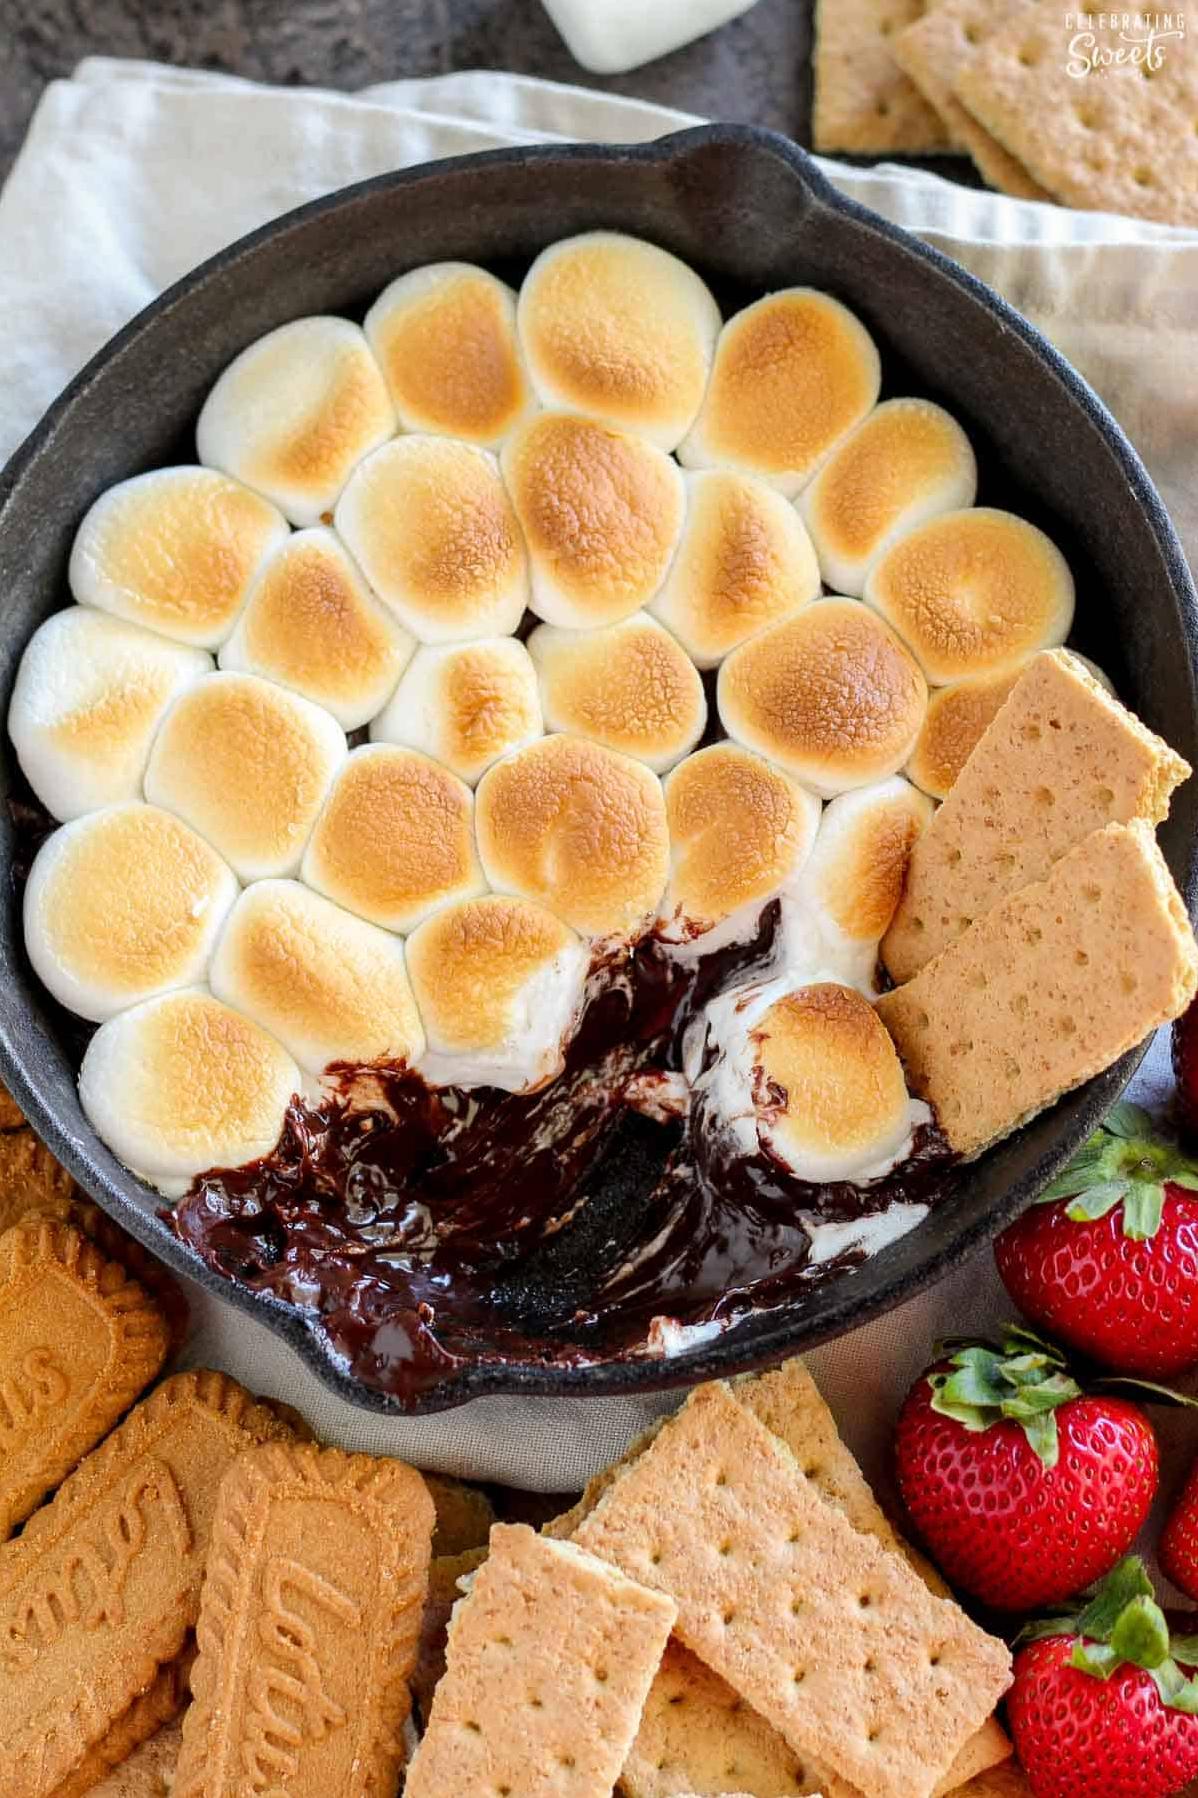  Perfect for your next party or cozy night in, you won't be able to resist this delicious dip.